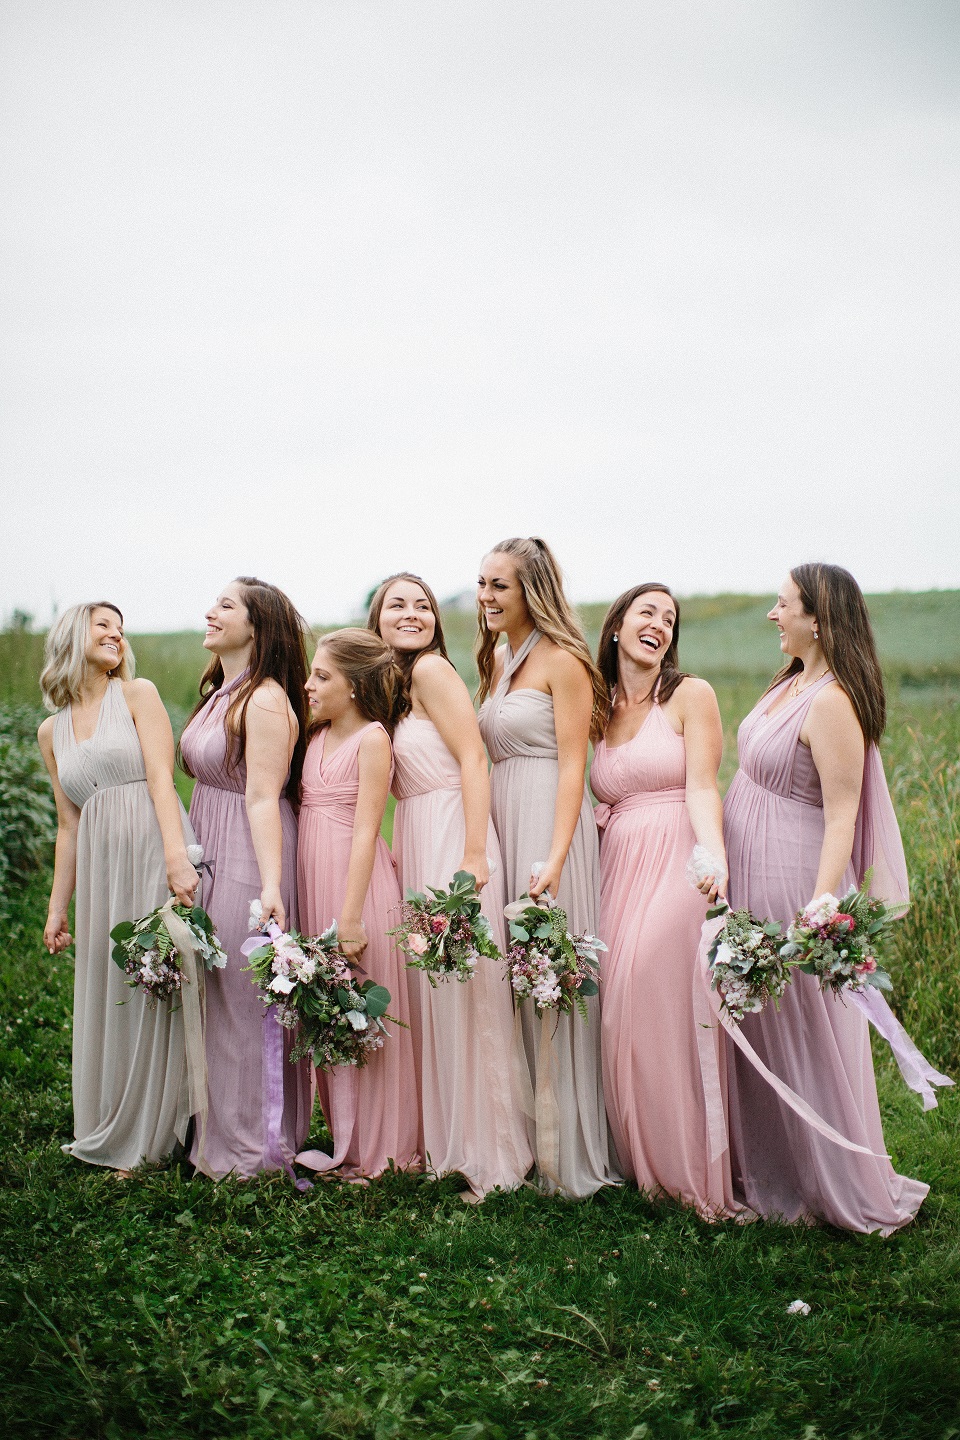 Bride Meghan's bridesmaids in shades of pink and purple